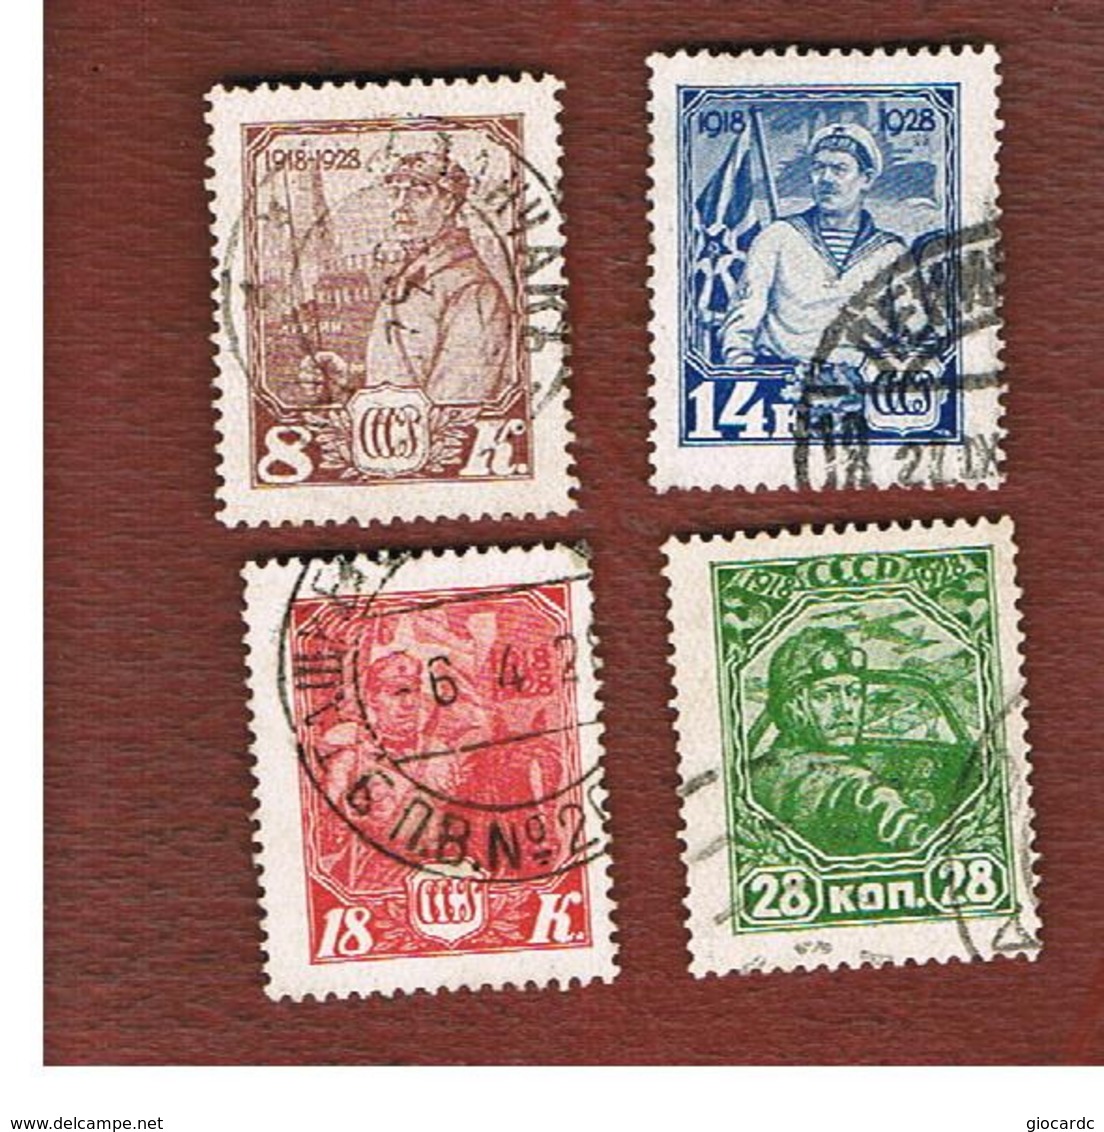 URSS -  SG 539.532   -  1928 RED ARMY ANNIVERSARY (COMPLET SET OF 4)  - USED °   RIF. CP - Oblitérés